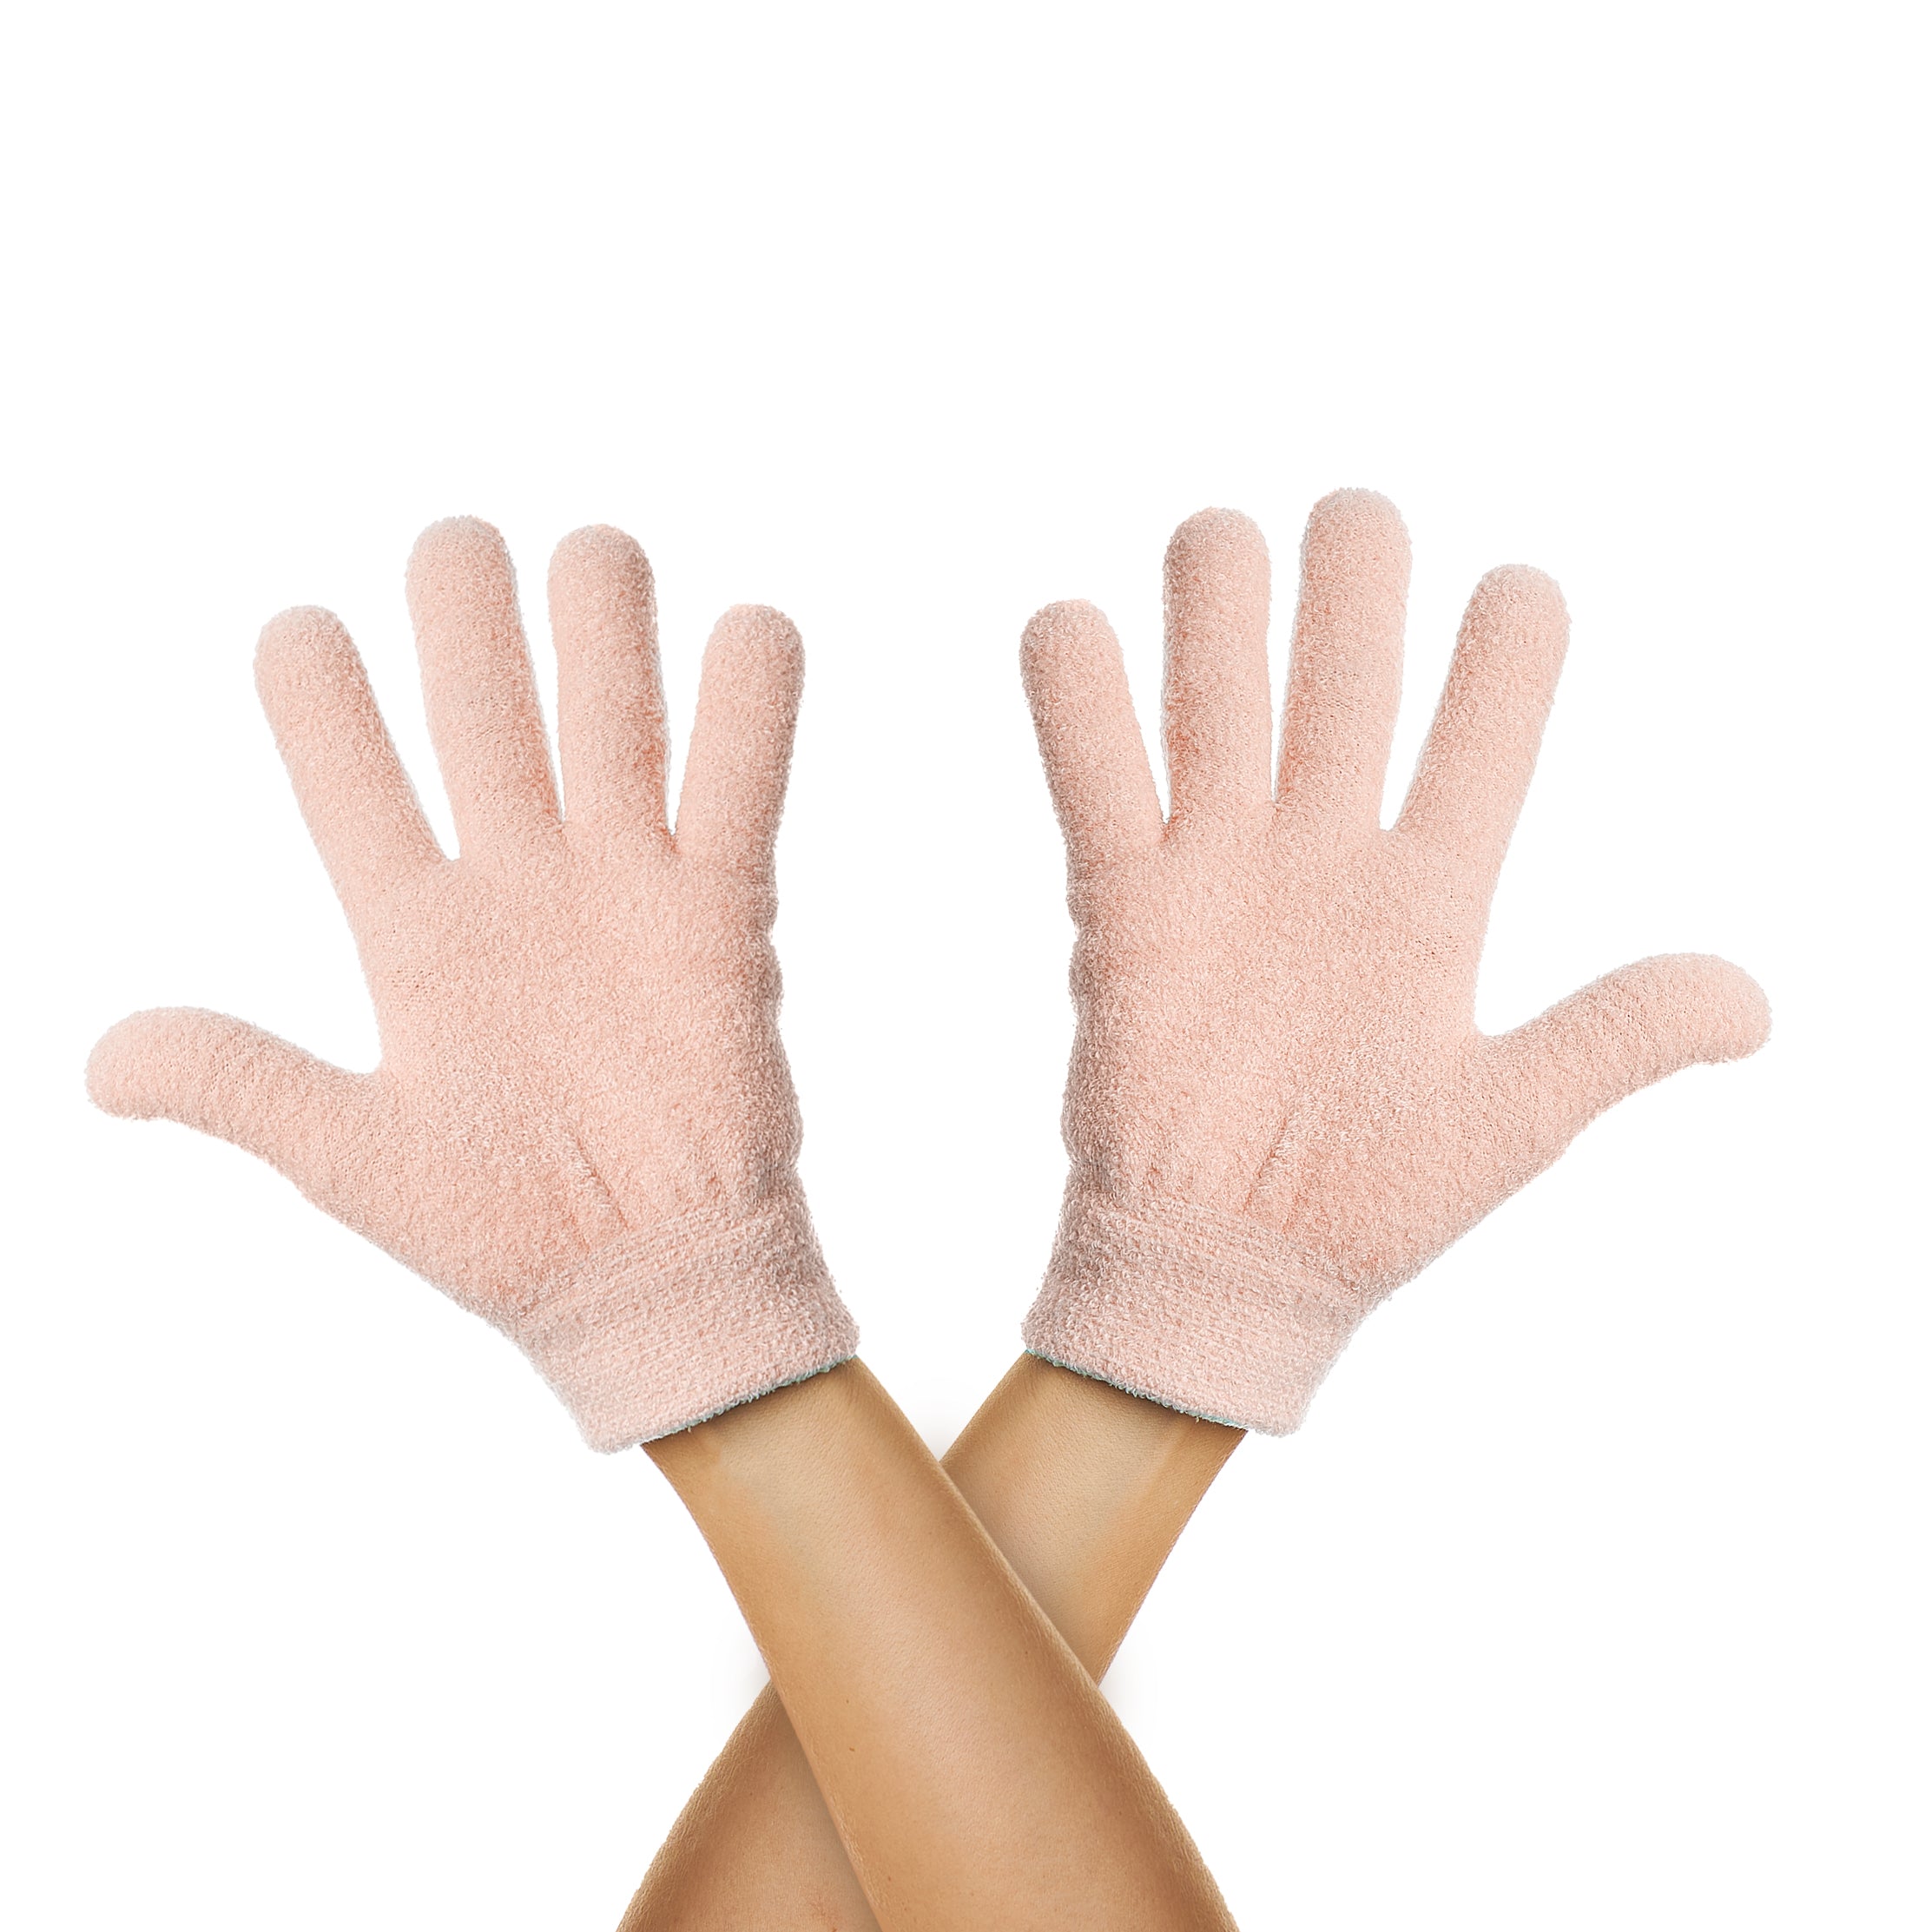 5 Things To Look For in Gloves for Eczema